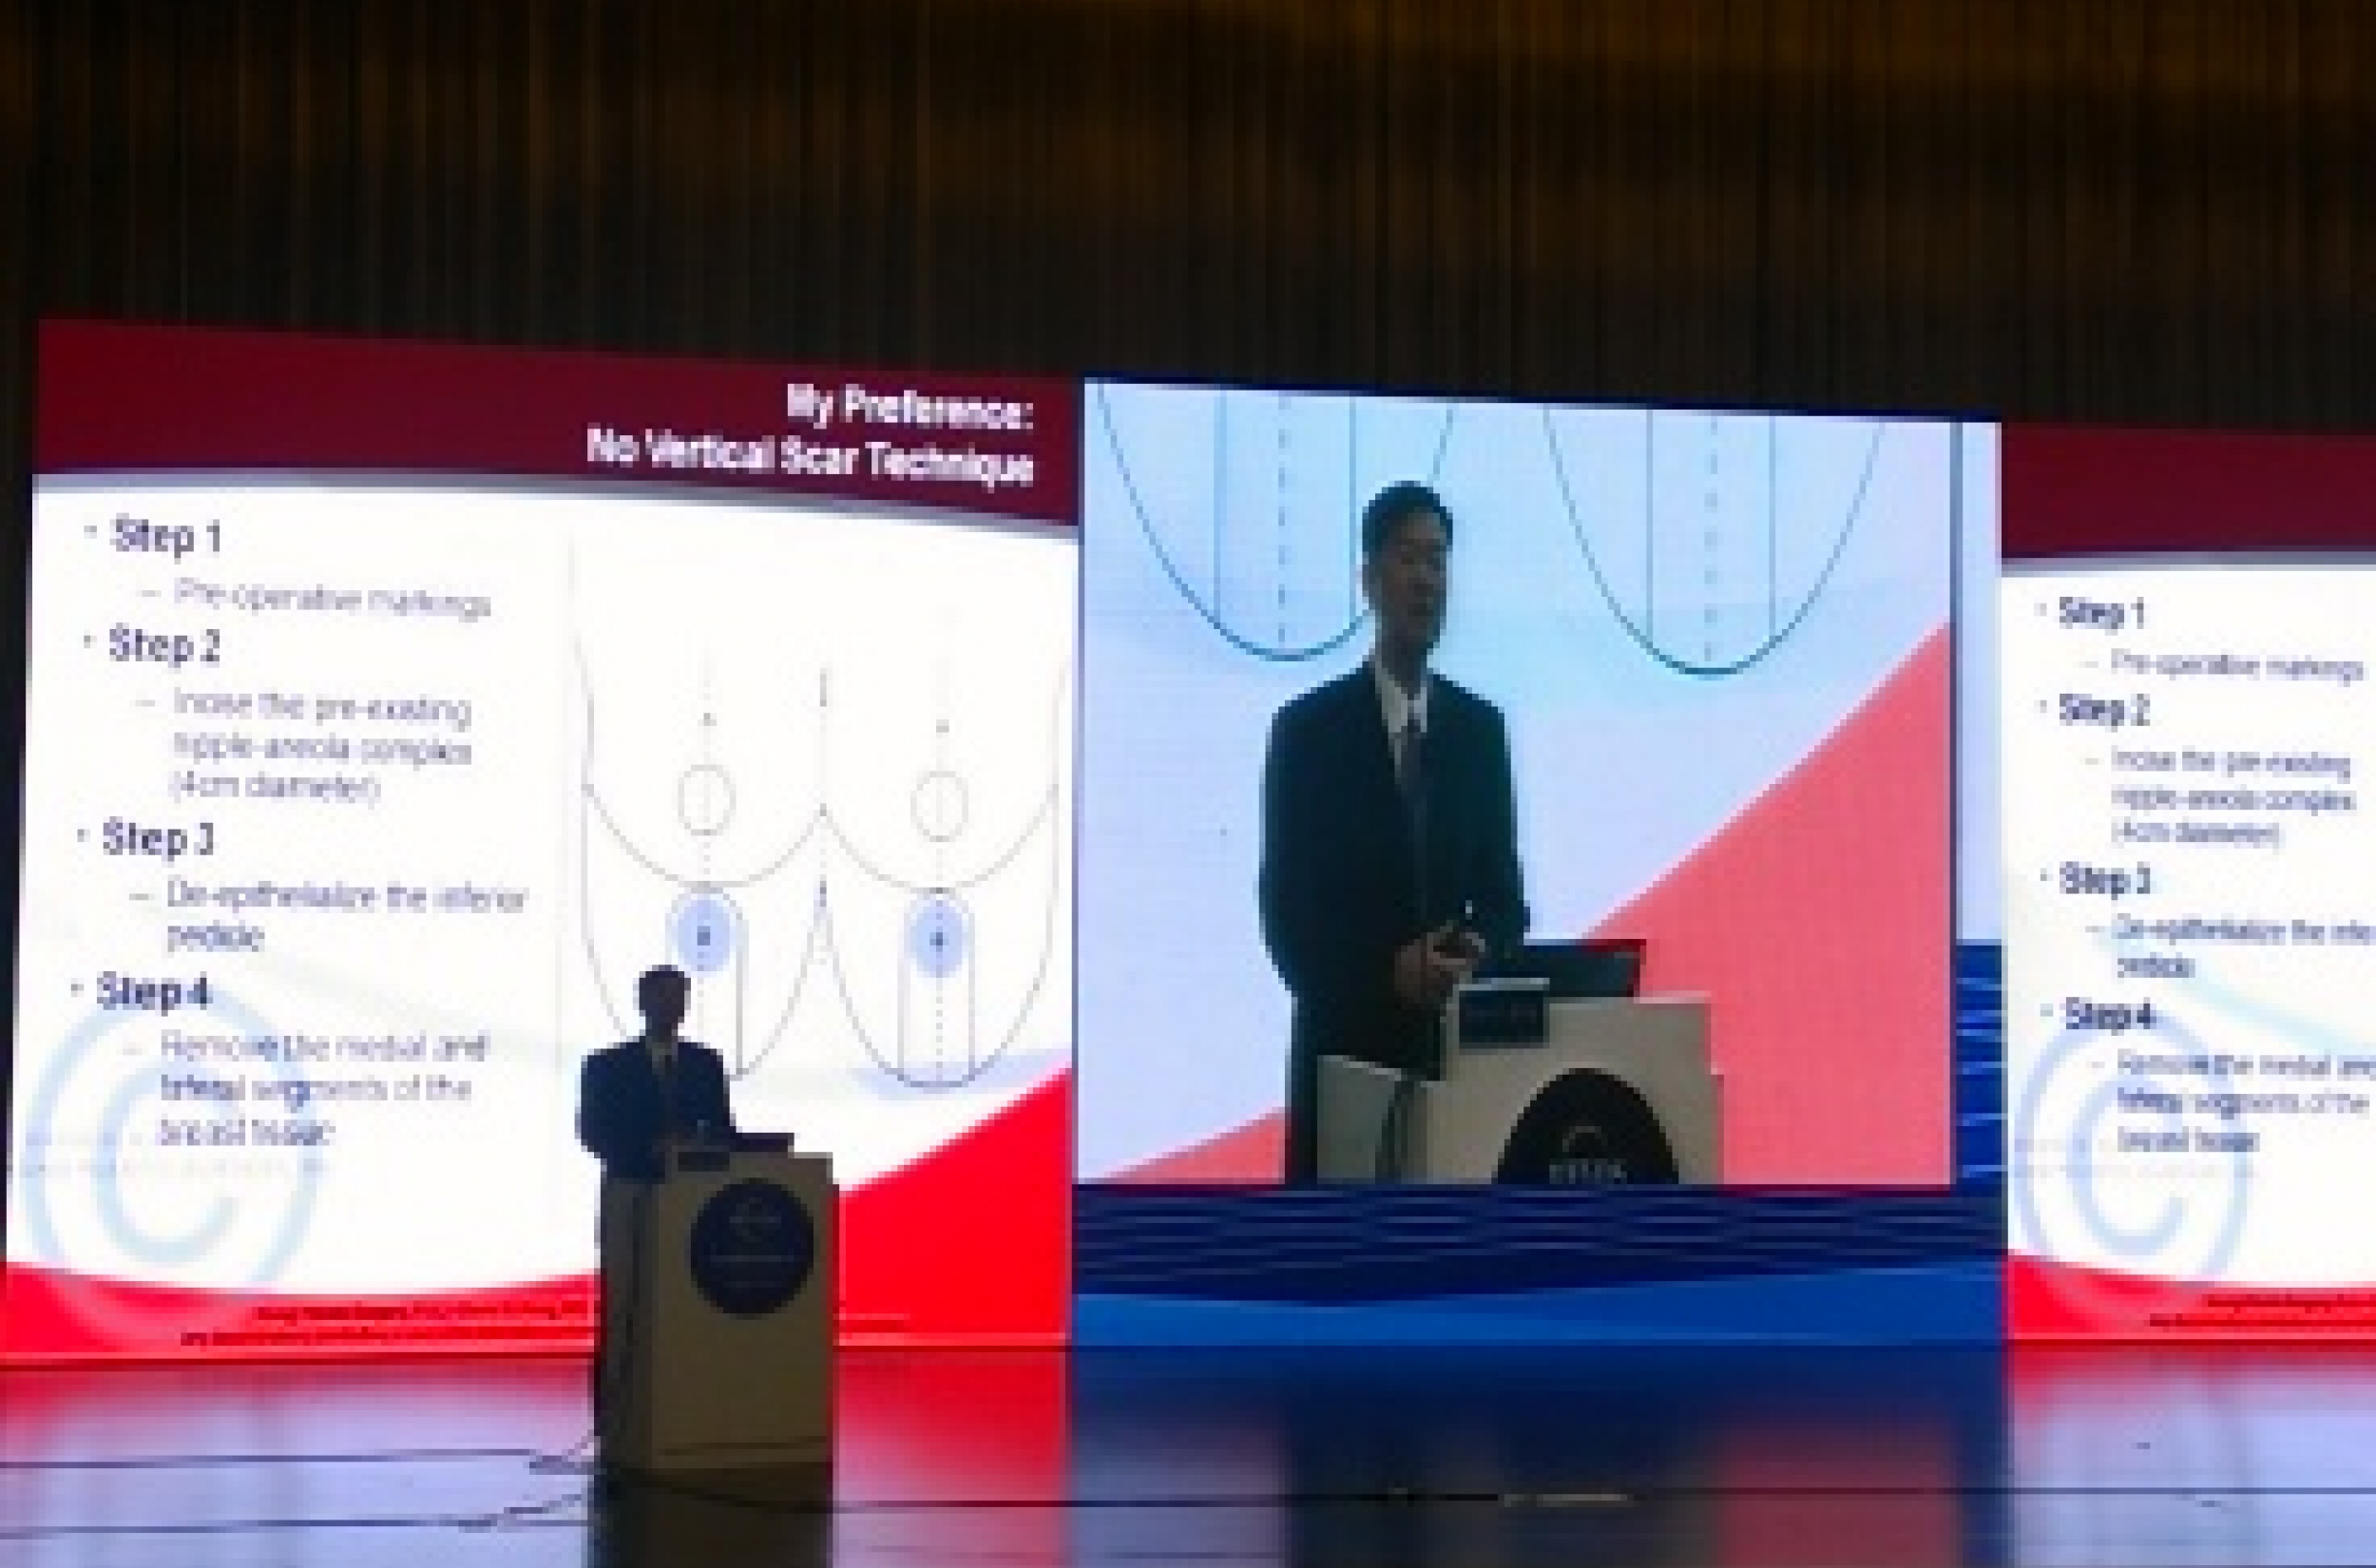 Dr. Kung at a Conference